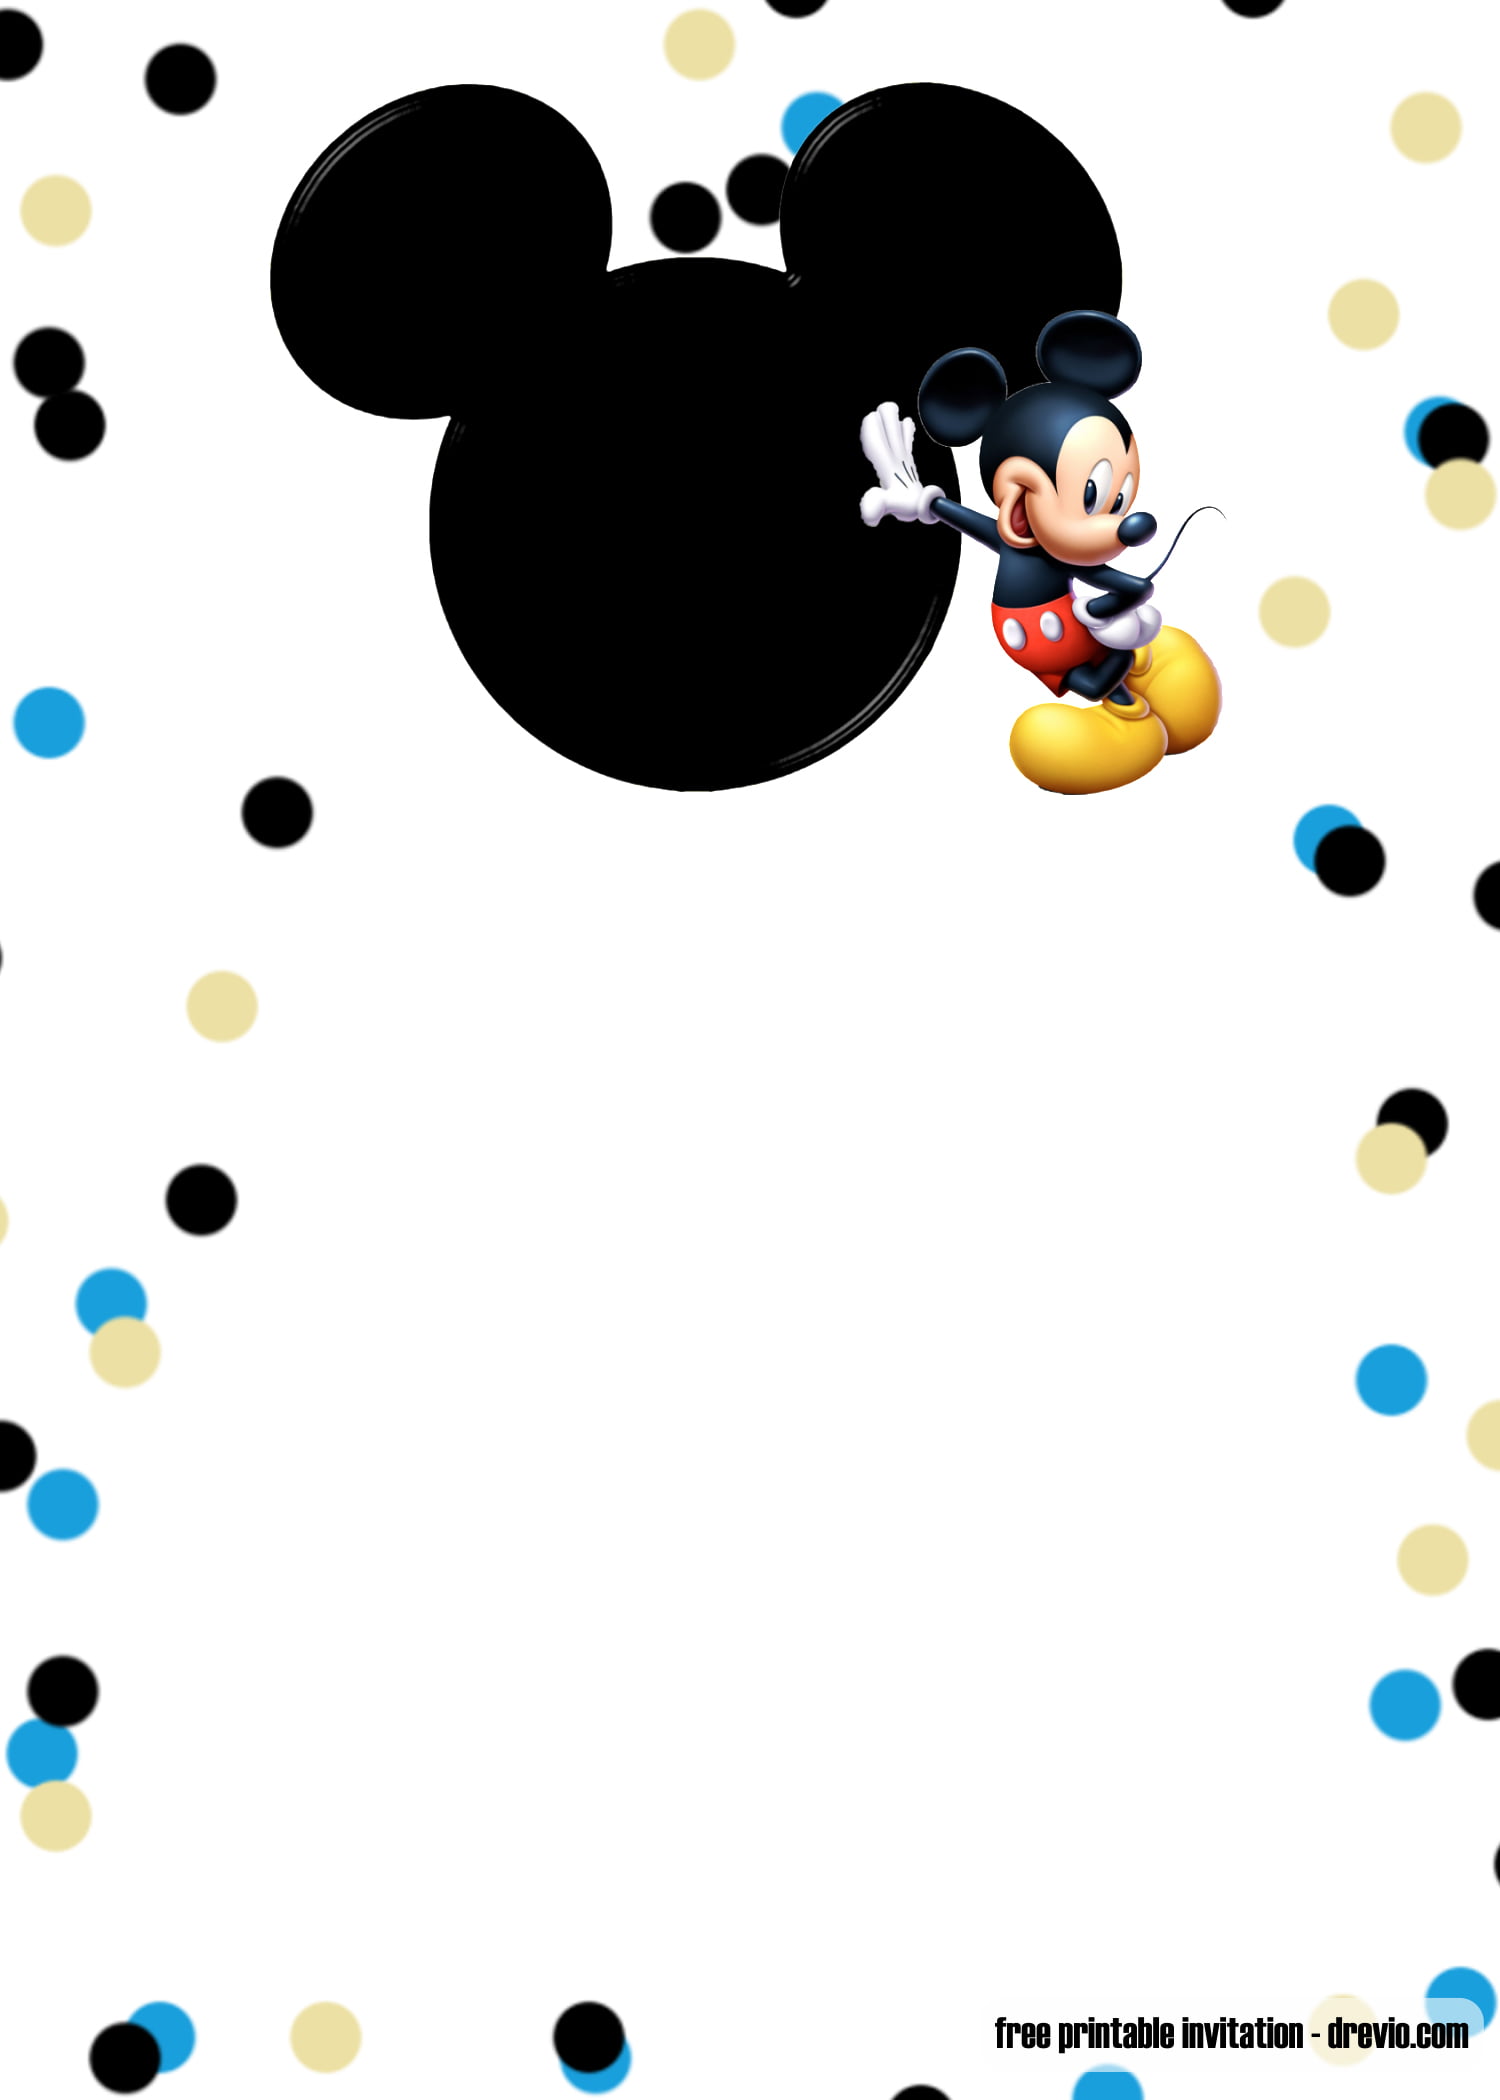 Mickey Mouse Invitation Template Printable from www.drevio.com